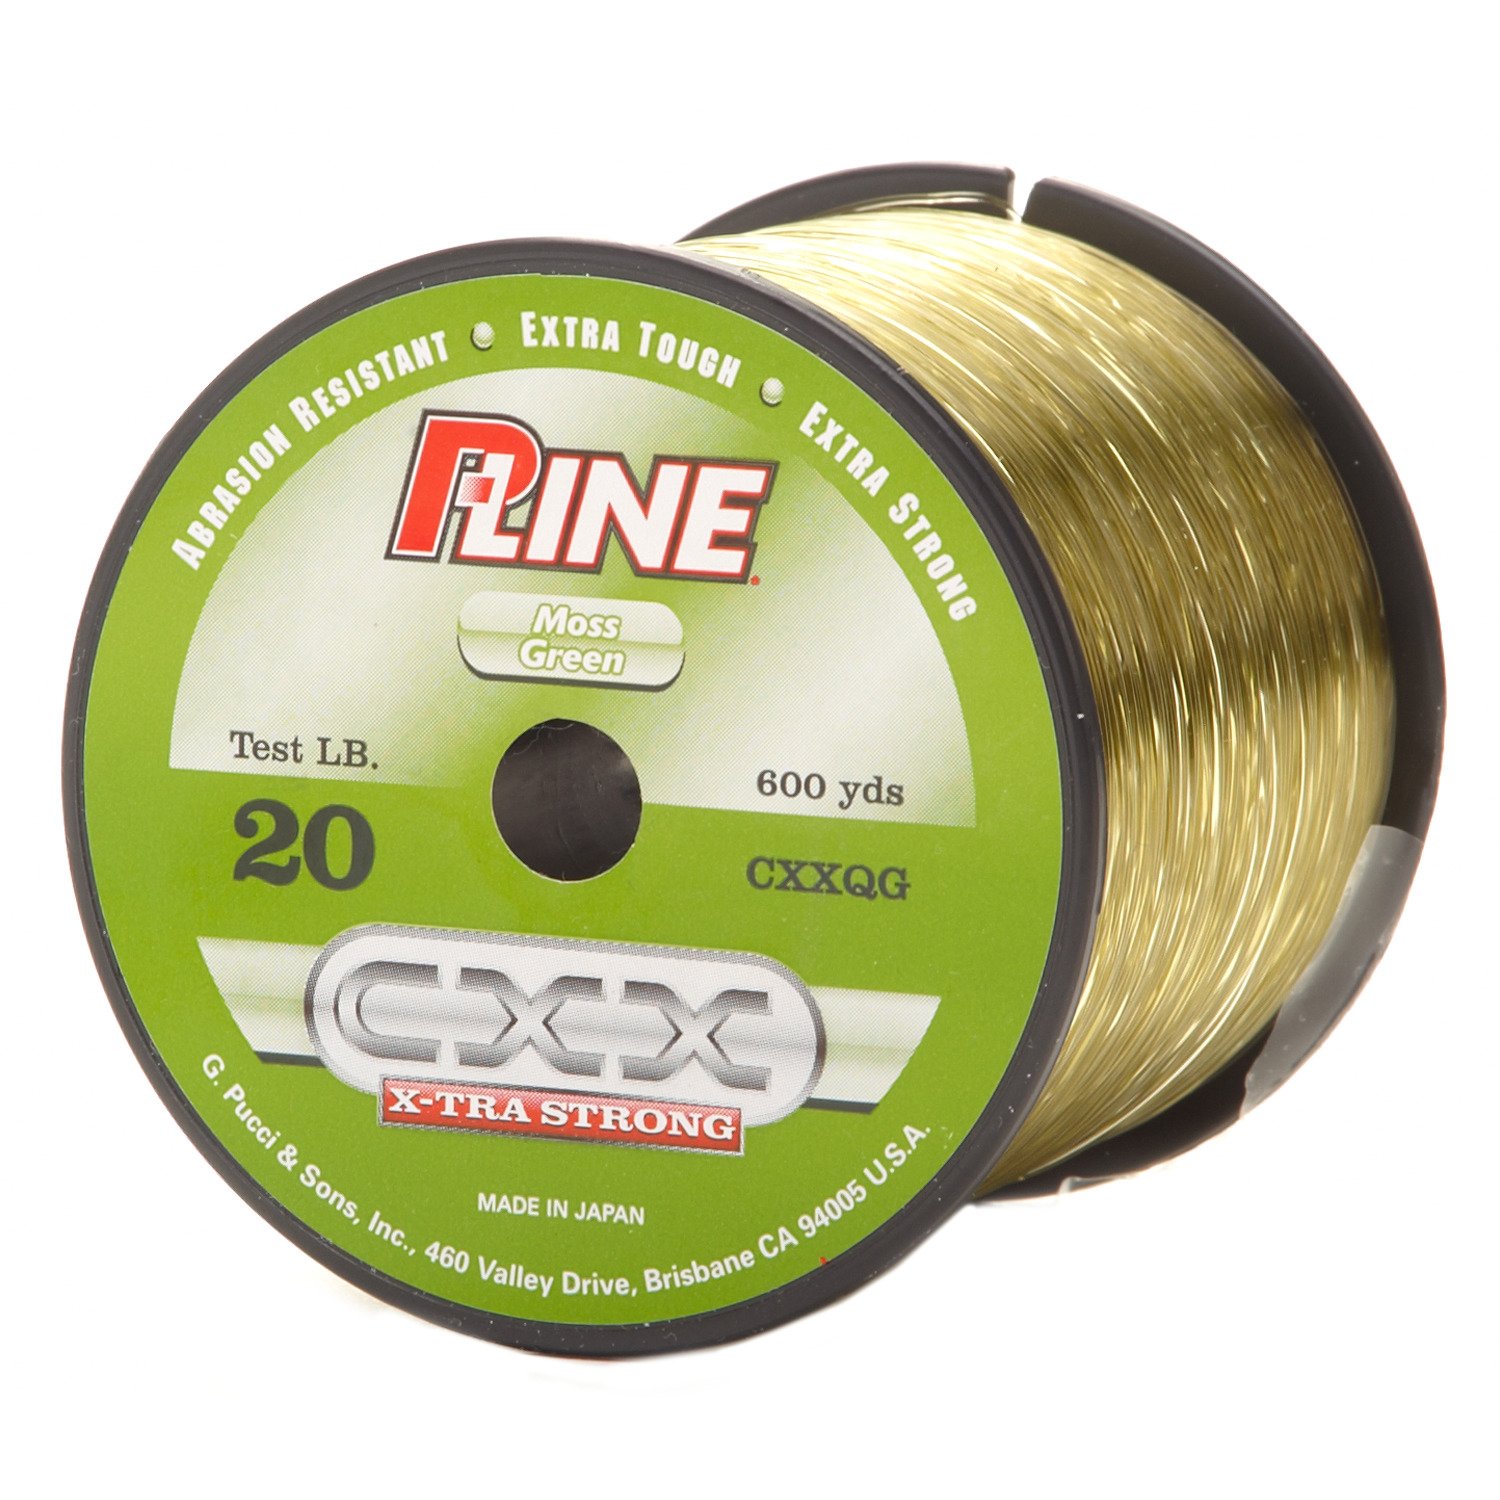  Sunline 63041836 Structure FC Clear 20 lb Fishing Line, Clear,  165 yd : General Sporting Equipment : Sports & Outdoors